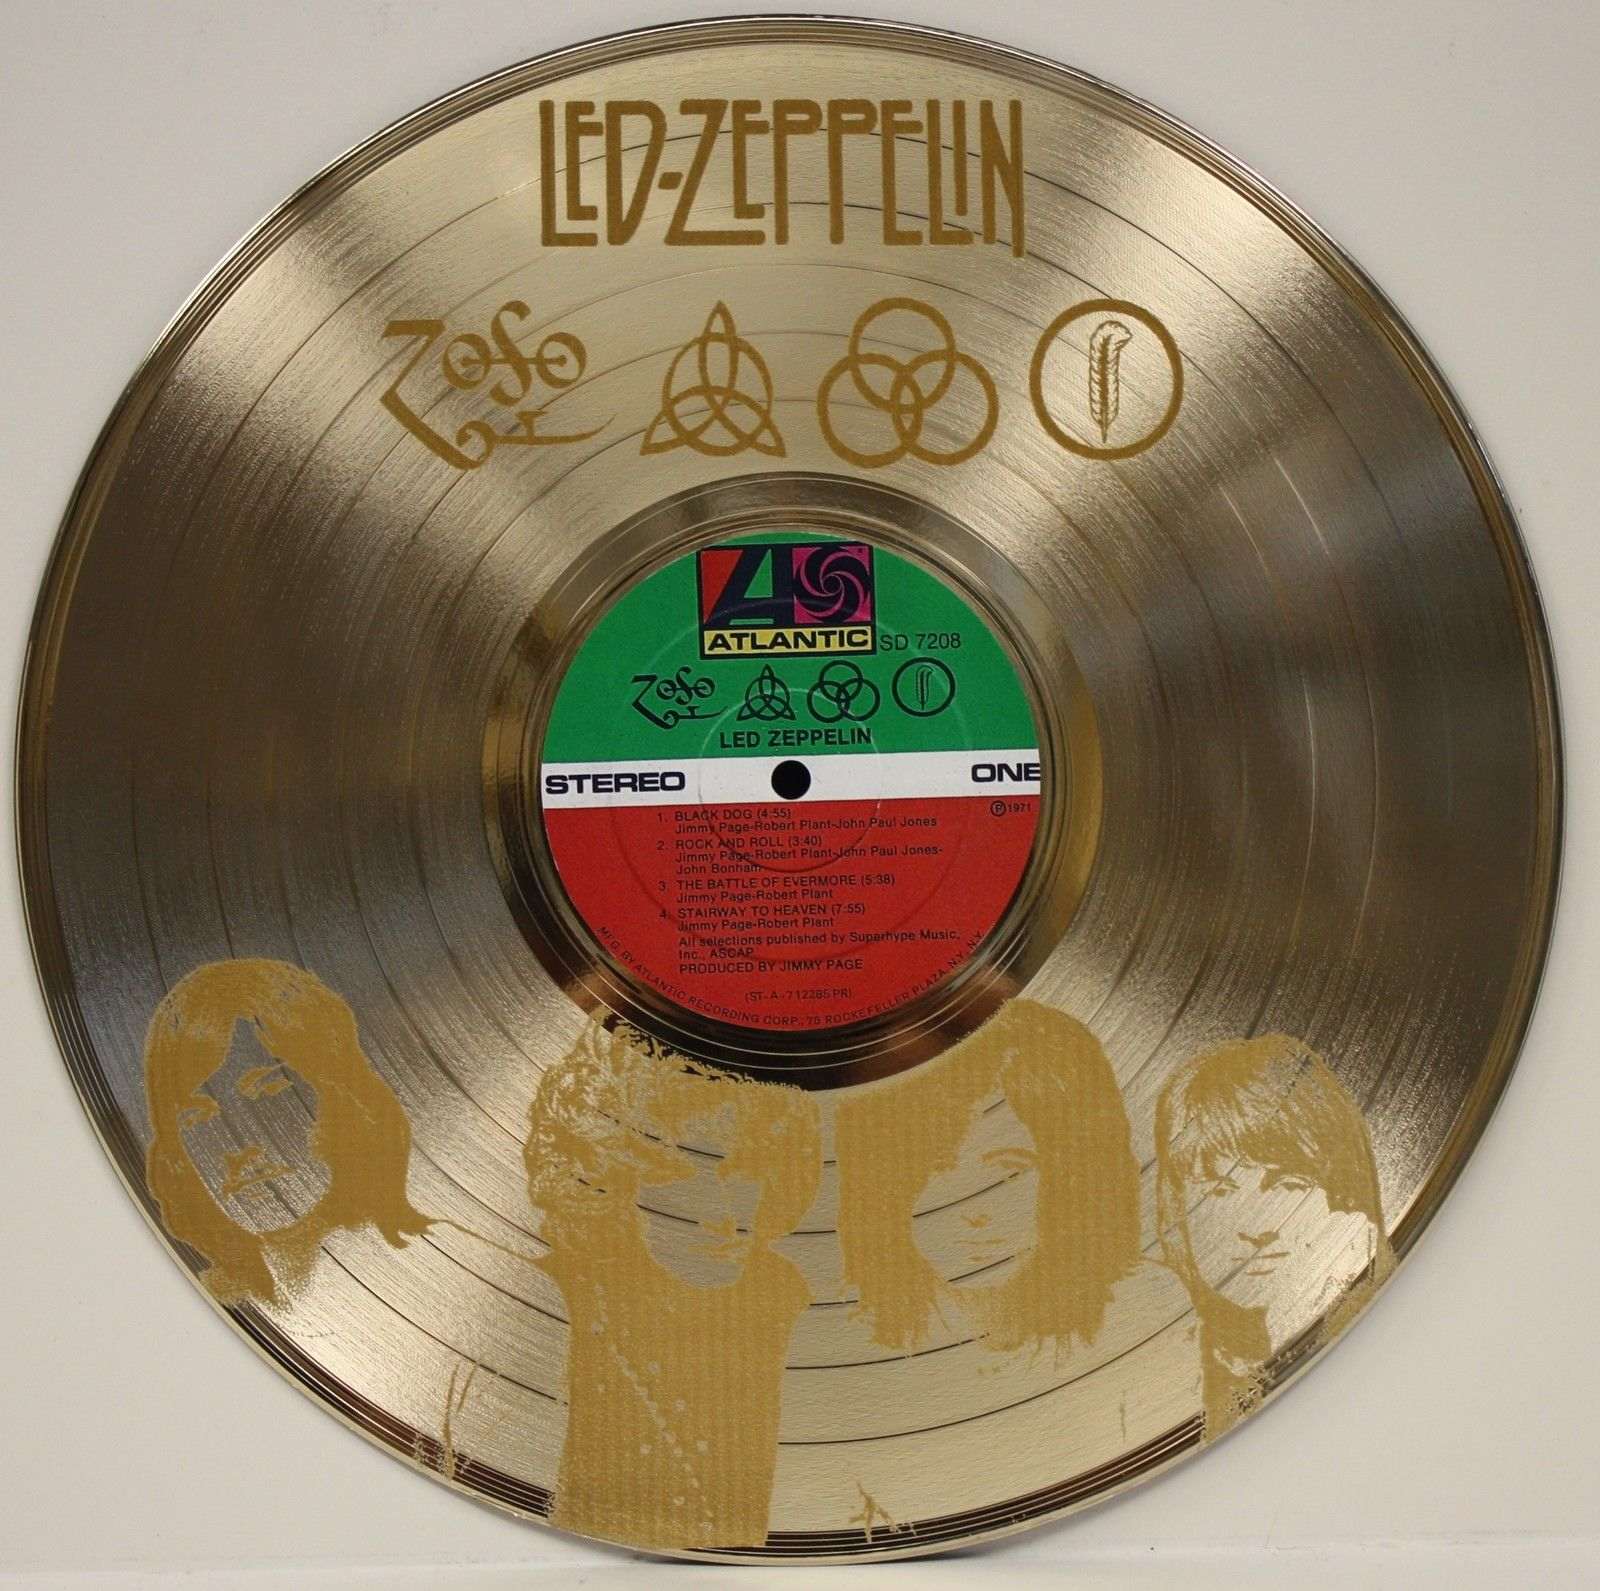 listener By the way it can Led Zeppelin ZoSo #2 Laser Etched Ltd Edition Gold LP Record Wall Display -  Gold Record Outlet Album and Disc Collectible Memorabilia